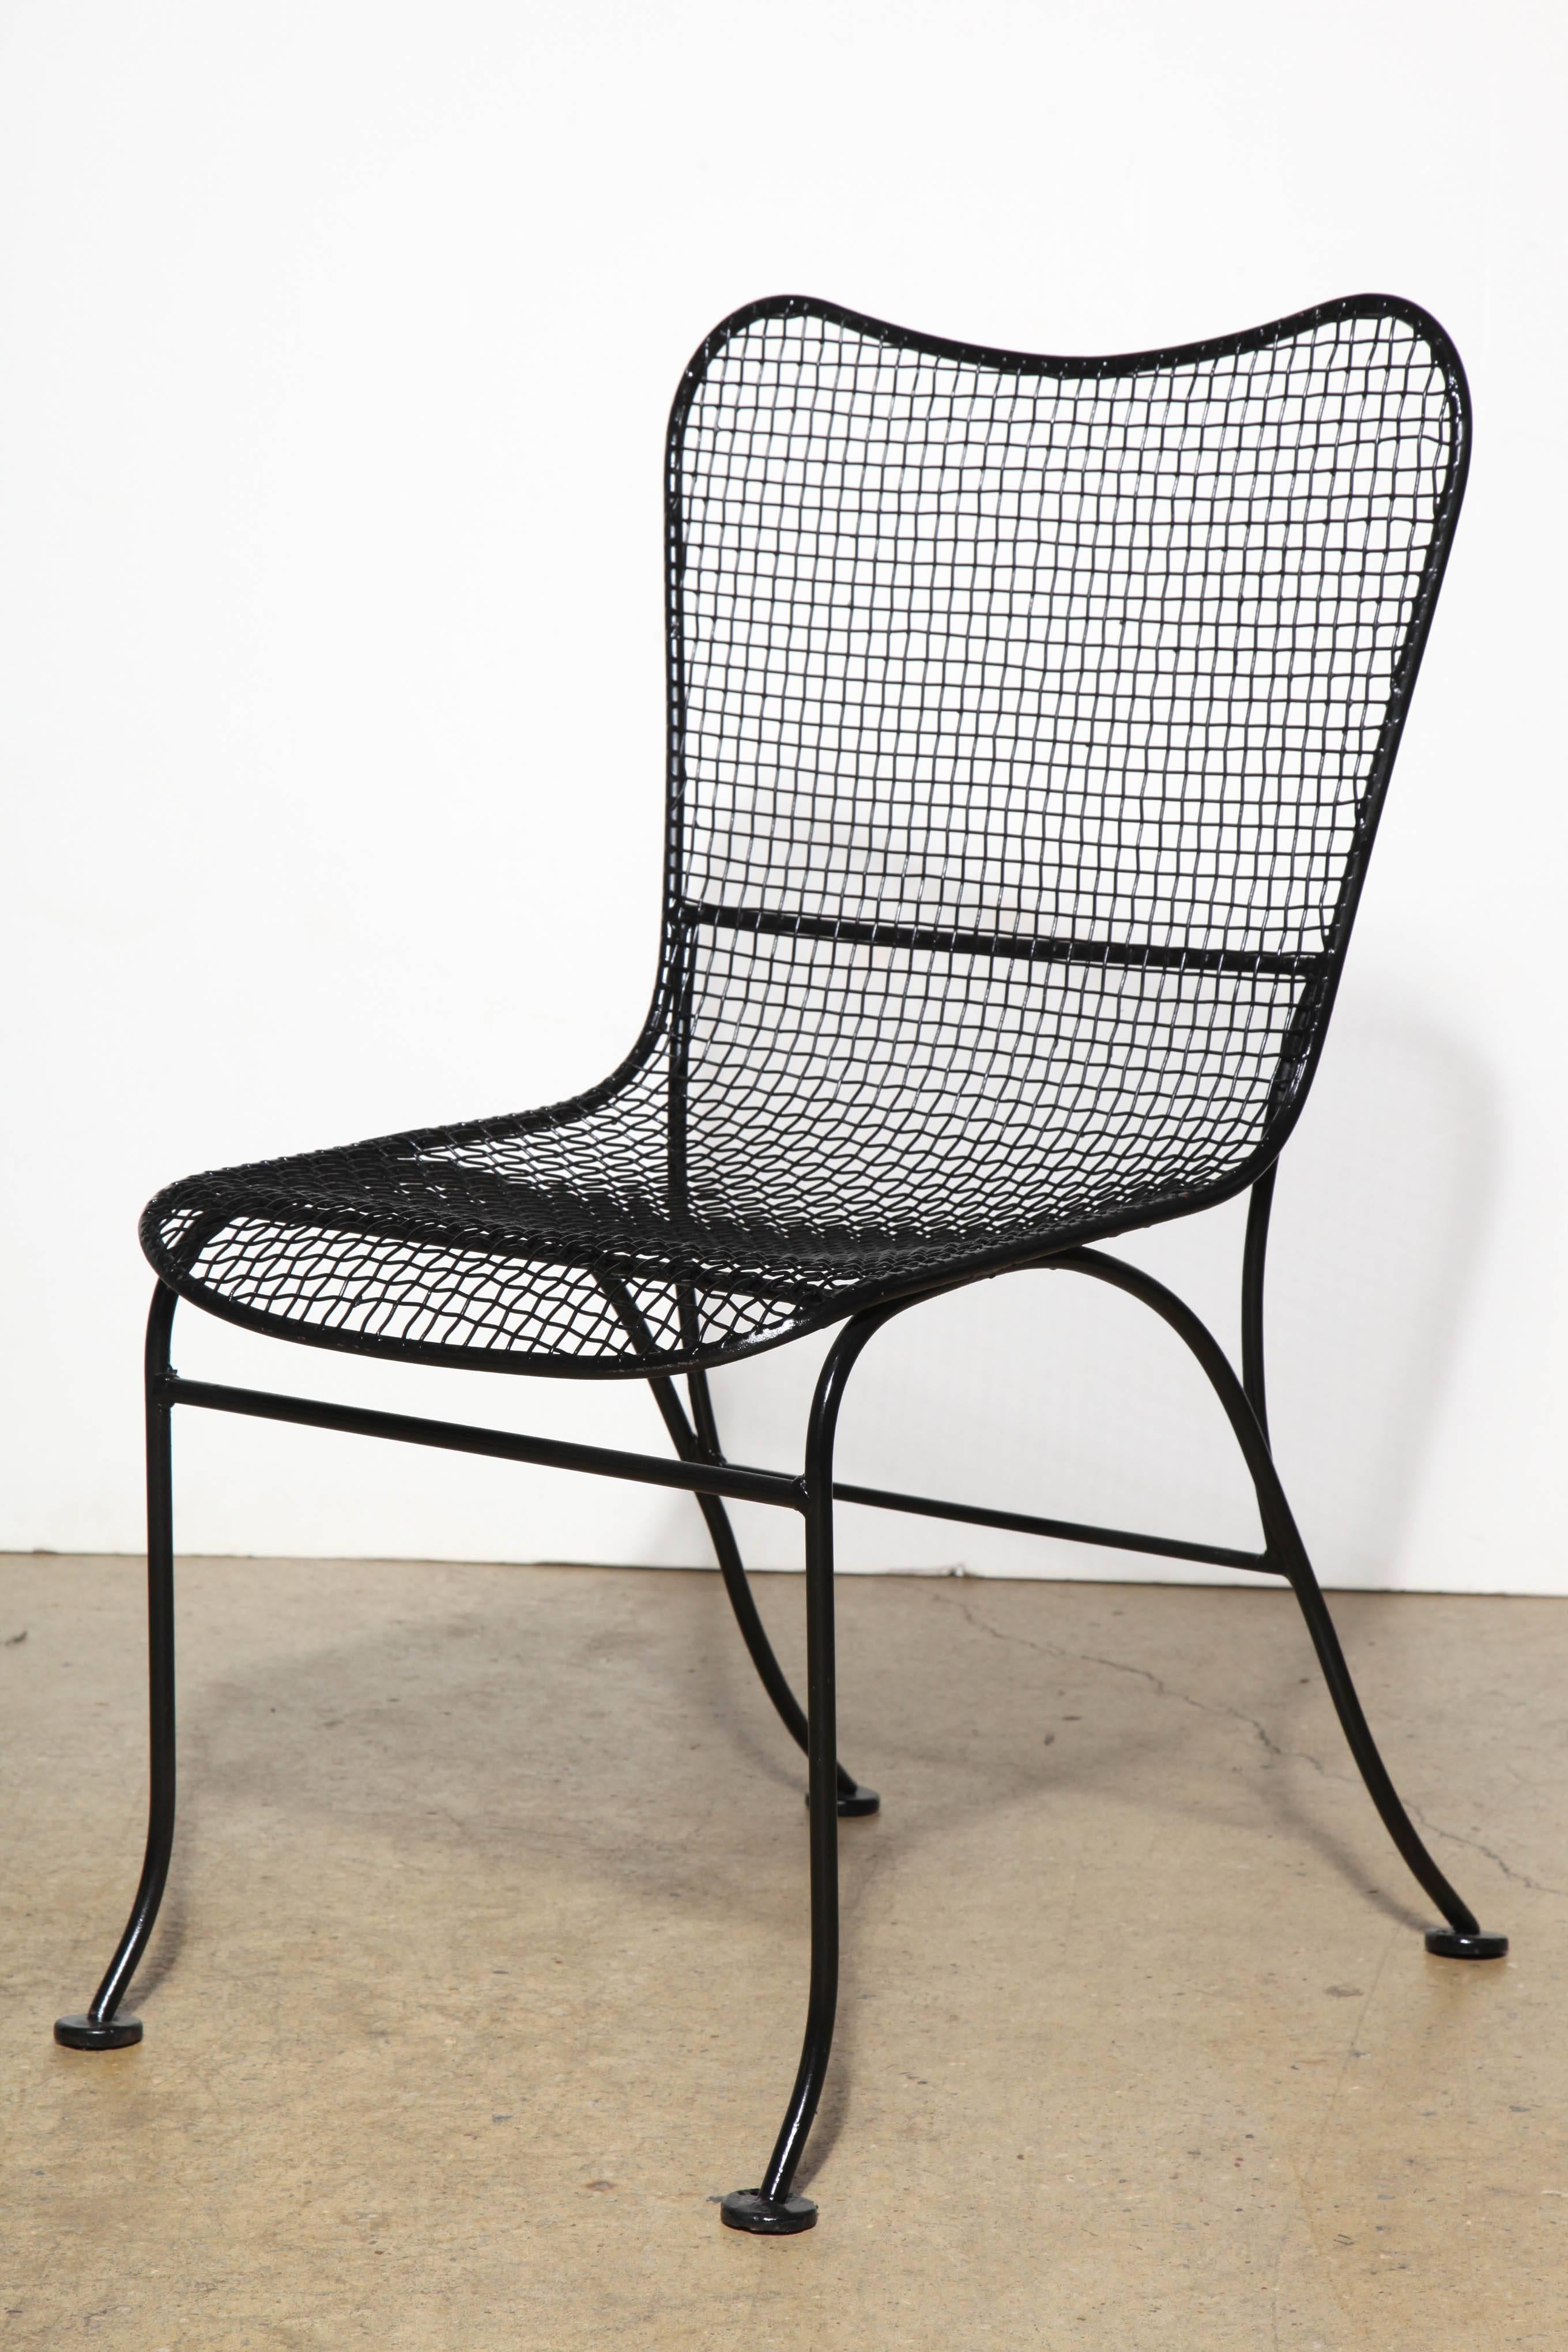 Four scarce, comfortable and elegant 1950s Russell Woodard wire mesh garden chairs. Black Wrought framework and legs. Ergonomic wire mesh seat and bowed back